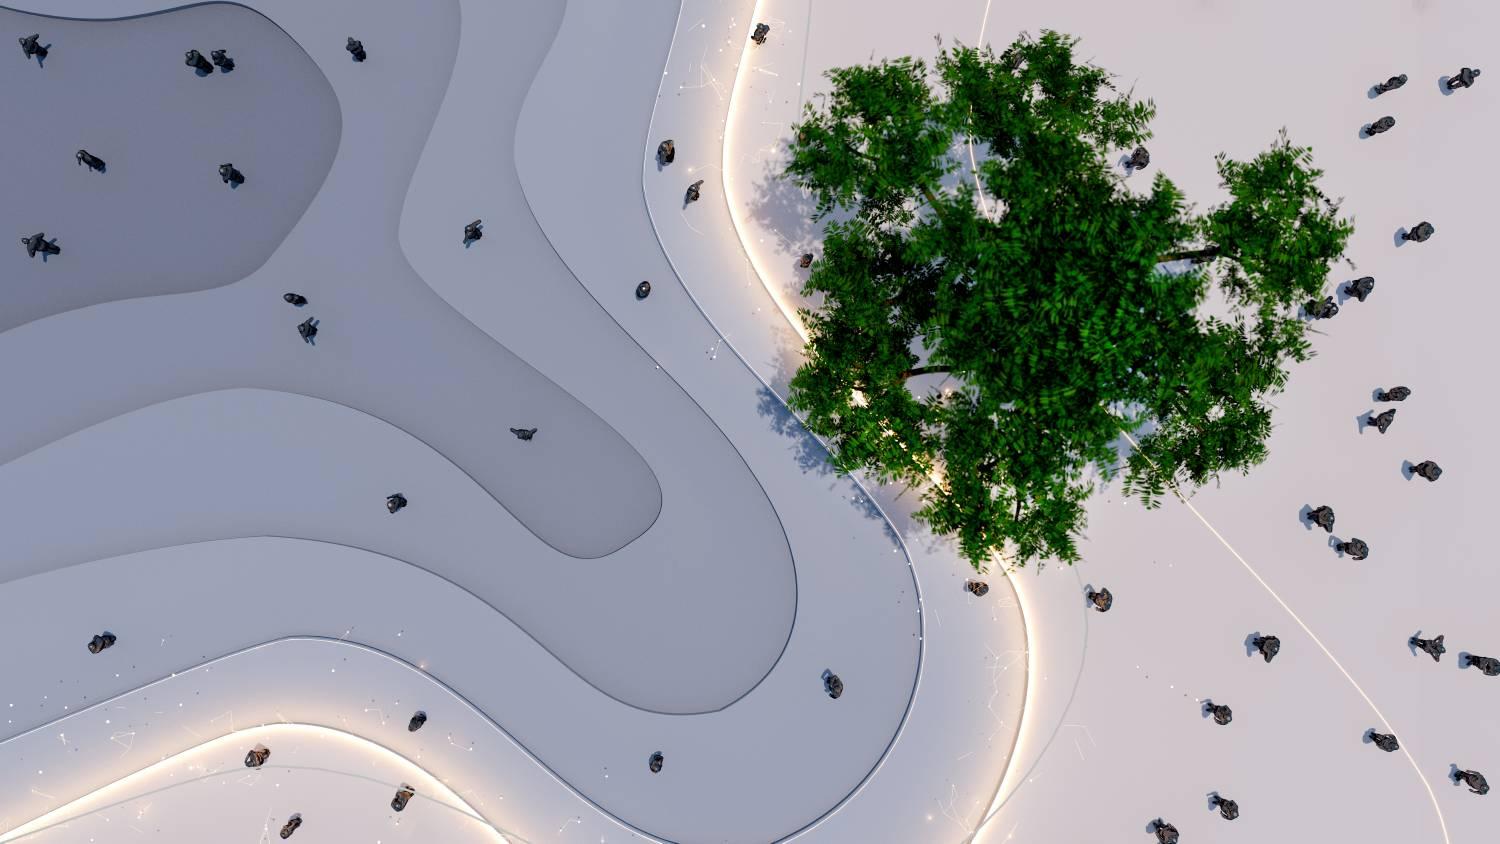 Overhead view of people positioned along topographic shapes and tree